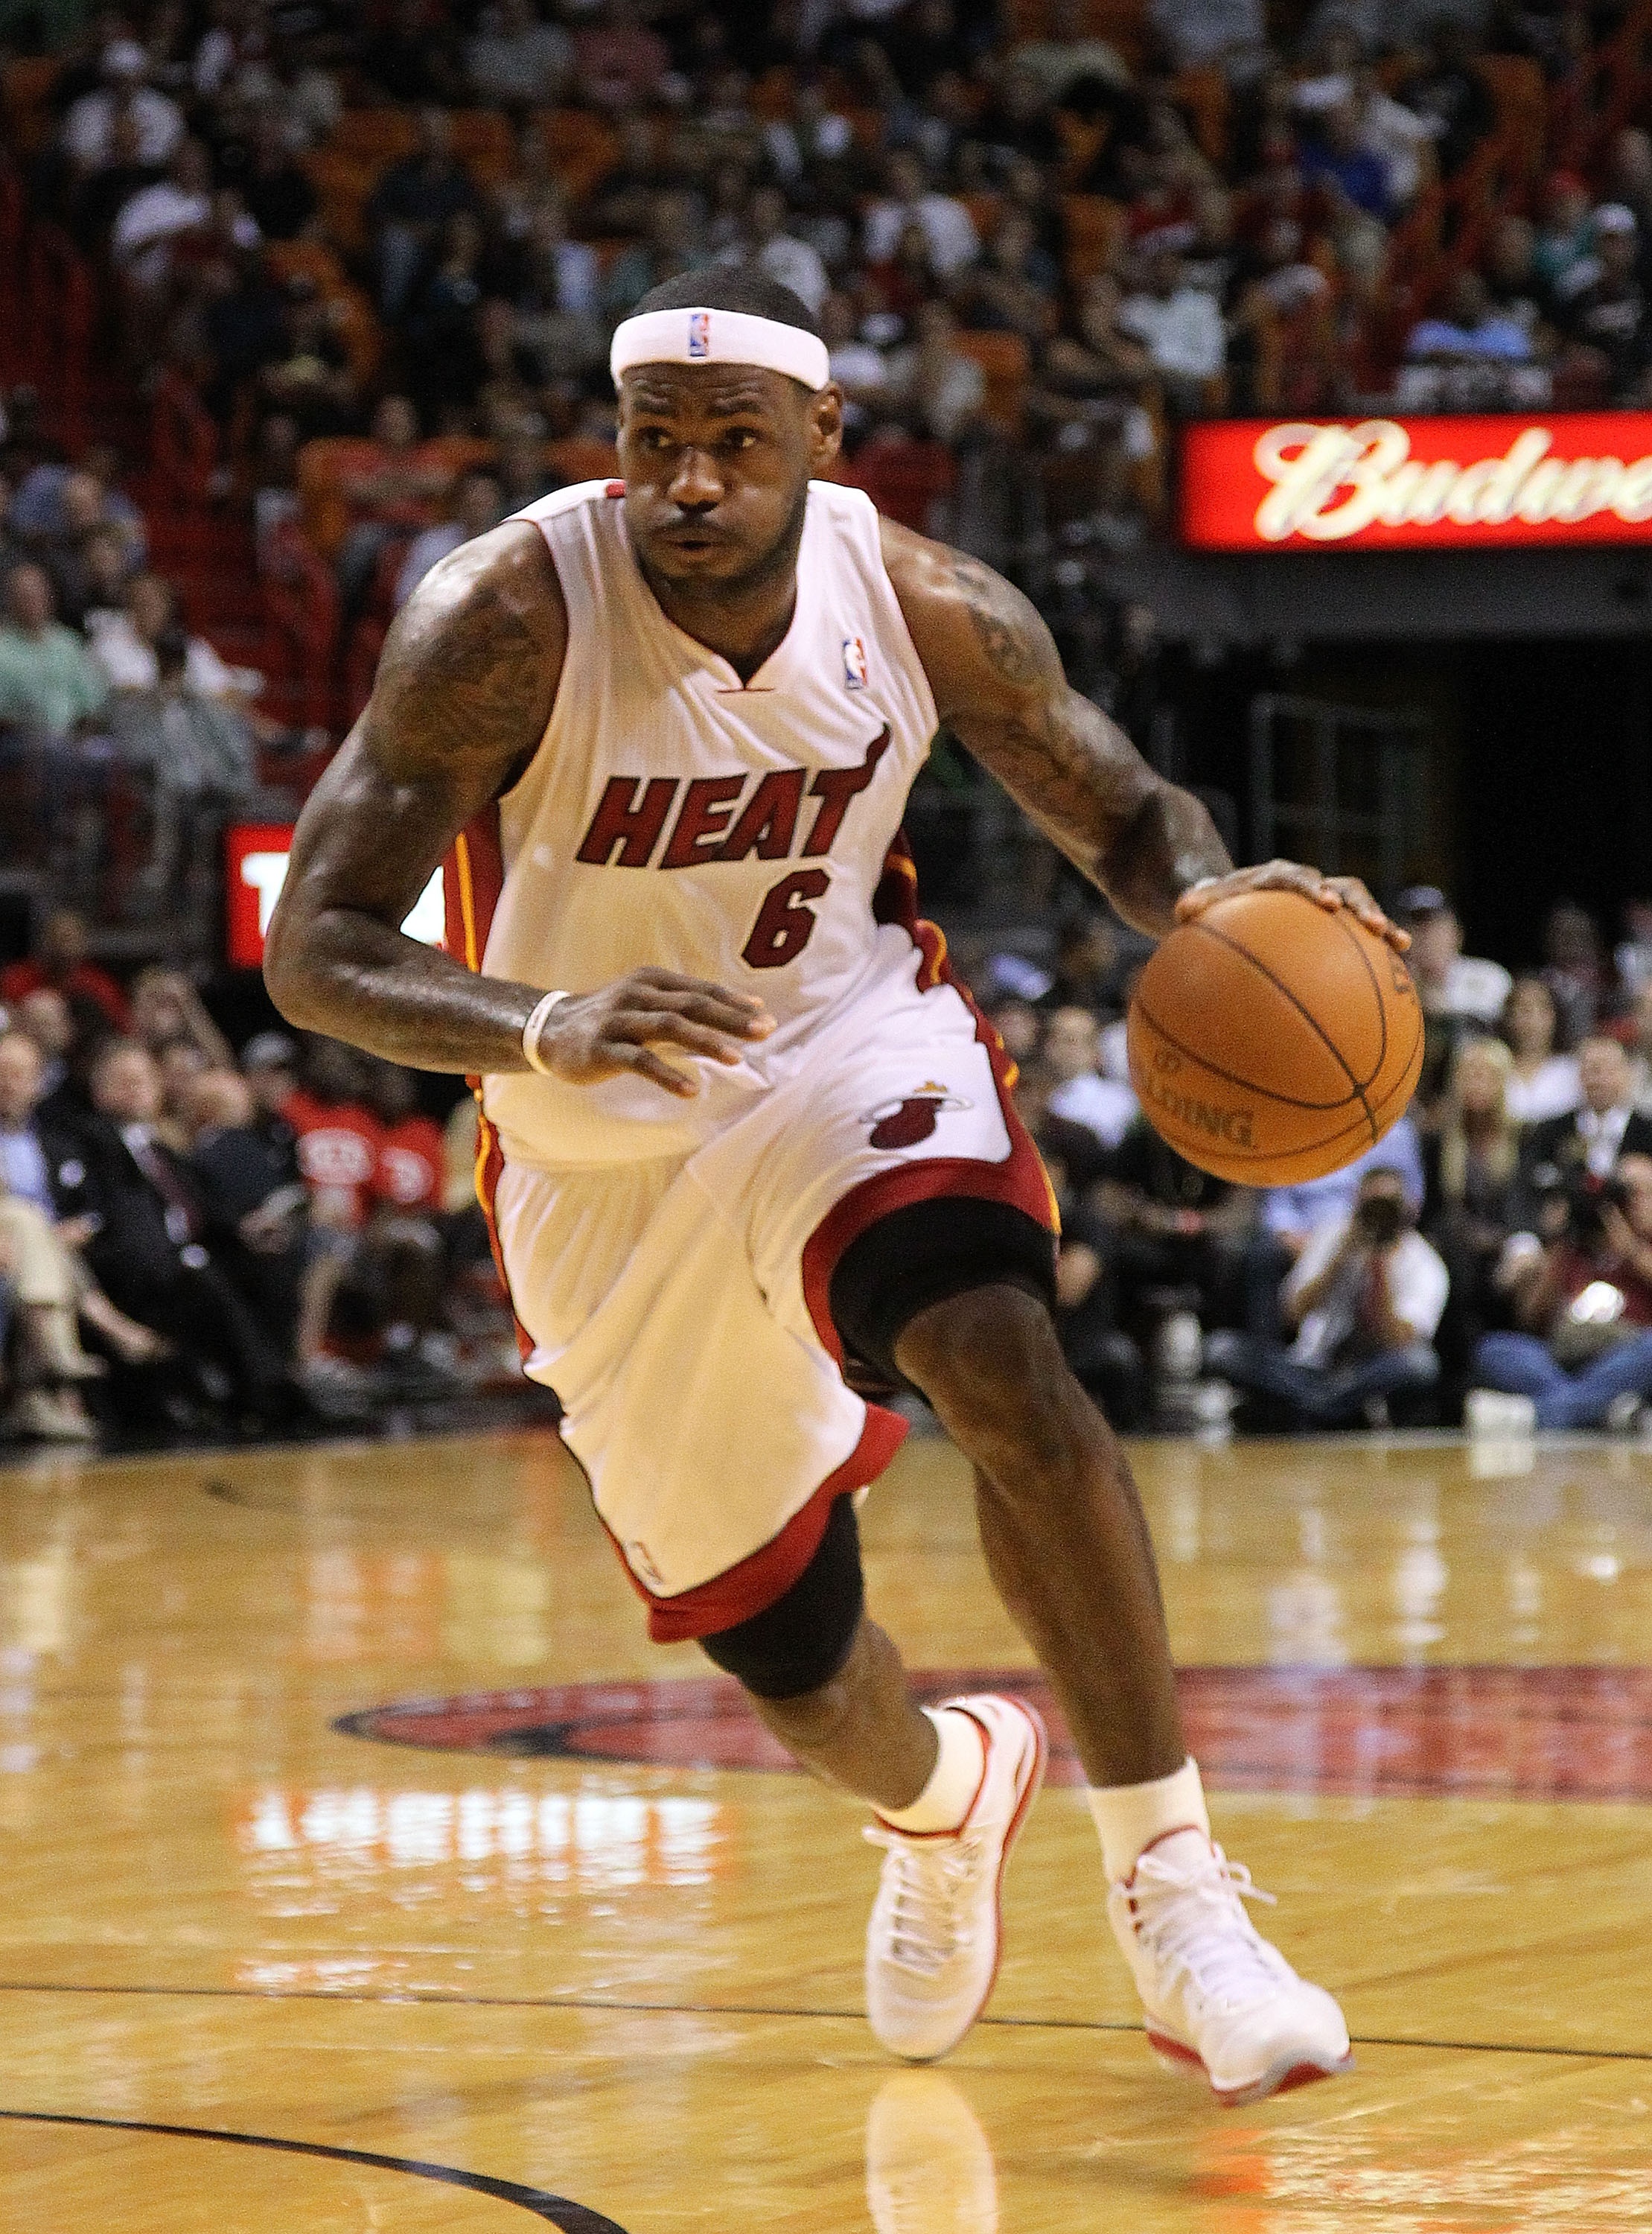 Was Lebron James The Most ATHLETIC Player Ever In 2009?